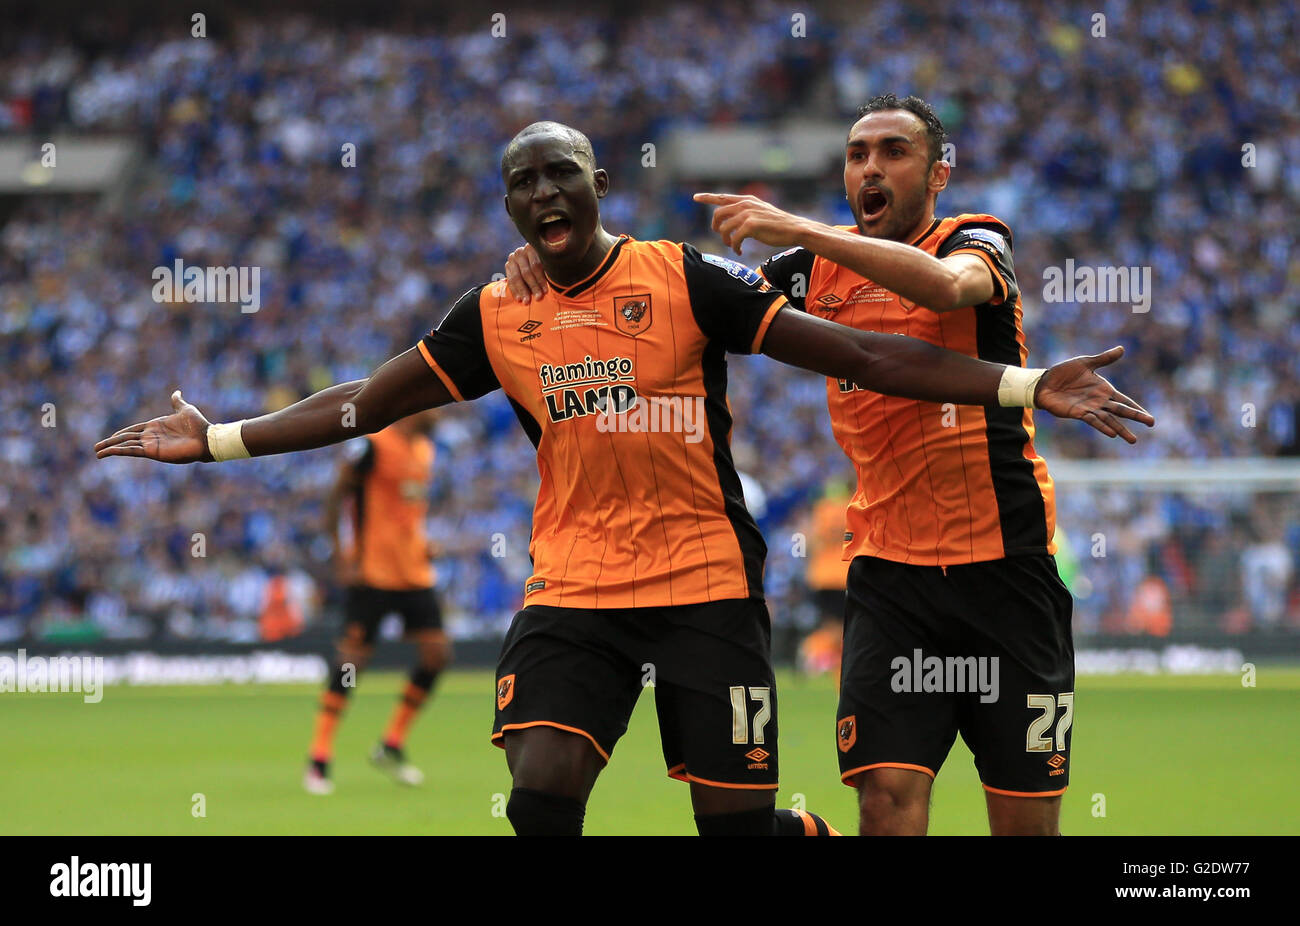 Hull City's Mohamed Diame celebrates scoring his side's first goal of the game with Ahmed Elmohamady (right) during the Championship Play-Off Final at Wembley Stadium, London. PRESS ASSOCIATION Photo. Picture date: Saturday May 28, 2016. See PA story SOCCER Championship. Photo credit should read: Nick Potts/PA Wire. RESTRICTIONS: No use with unauthorised audio, video, data, fixture lists, club/league logos or 'live' services. Online in-match use limited to 75 images, no video emulation. No use in betting, games or single club/league/player publications. Stock Photo